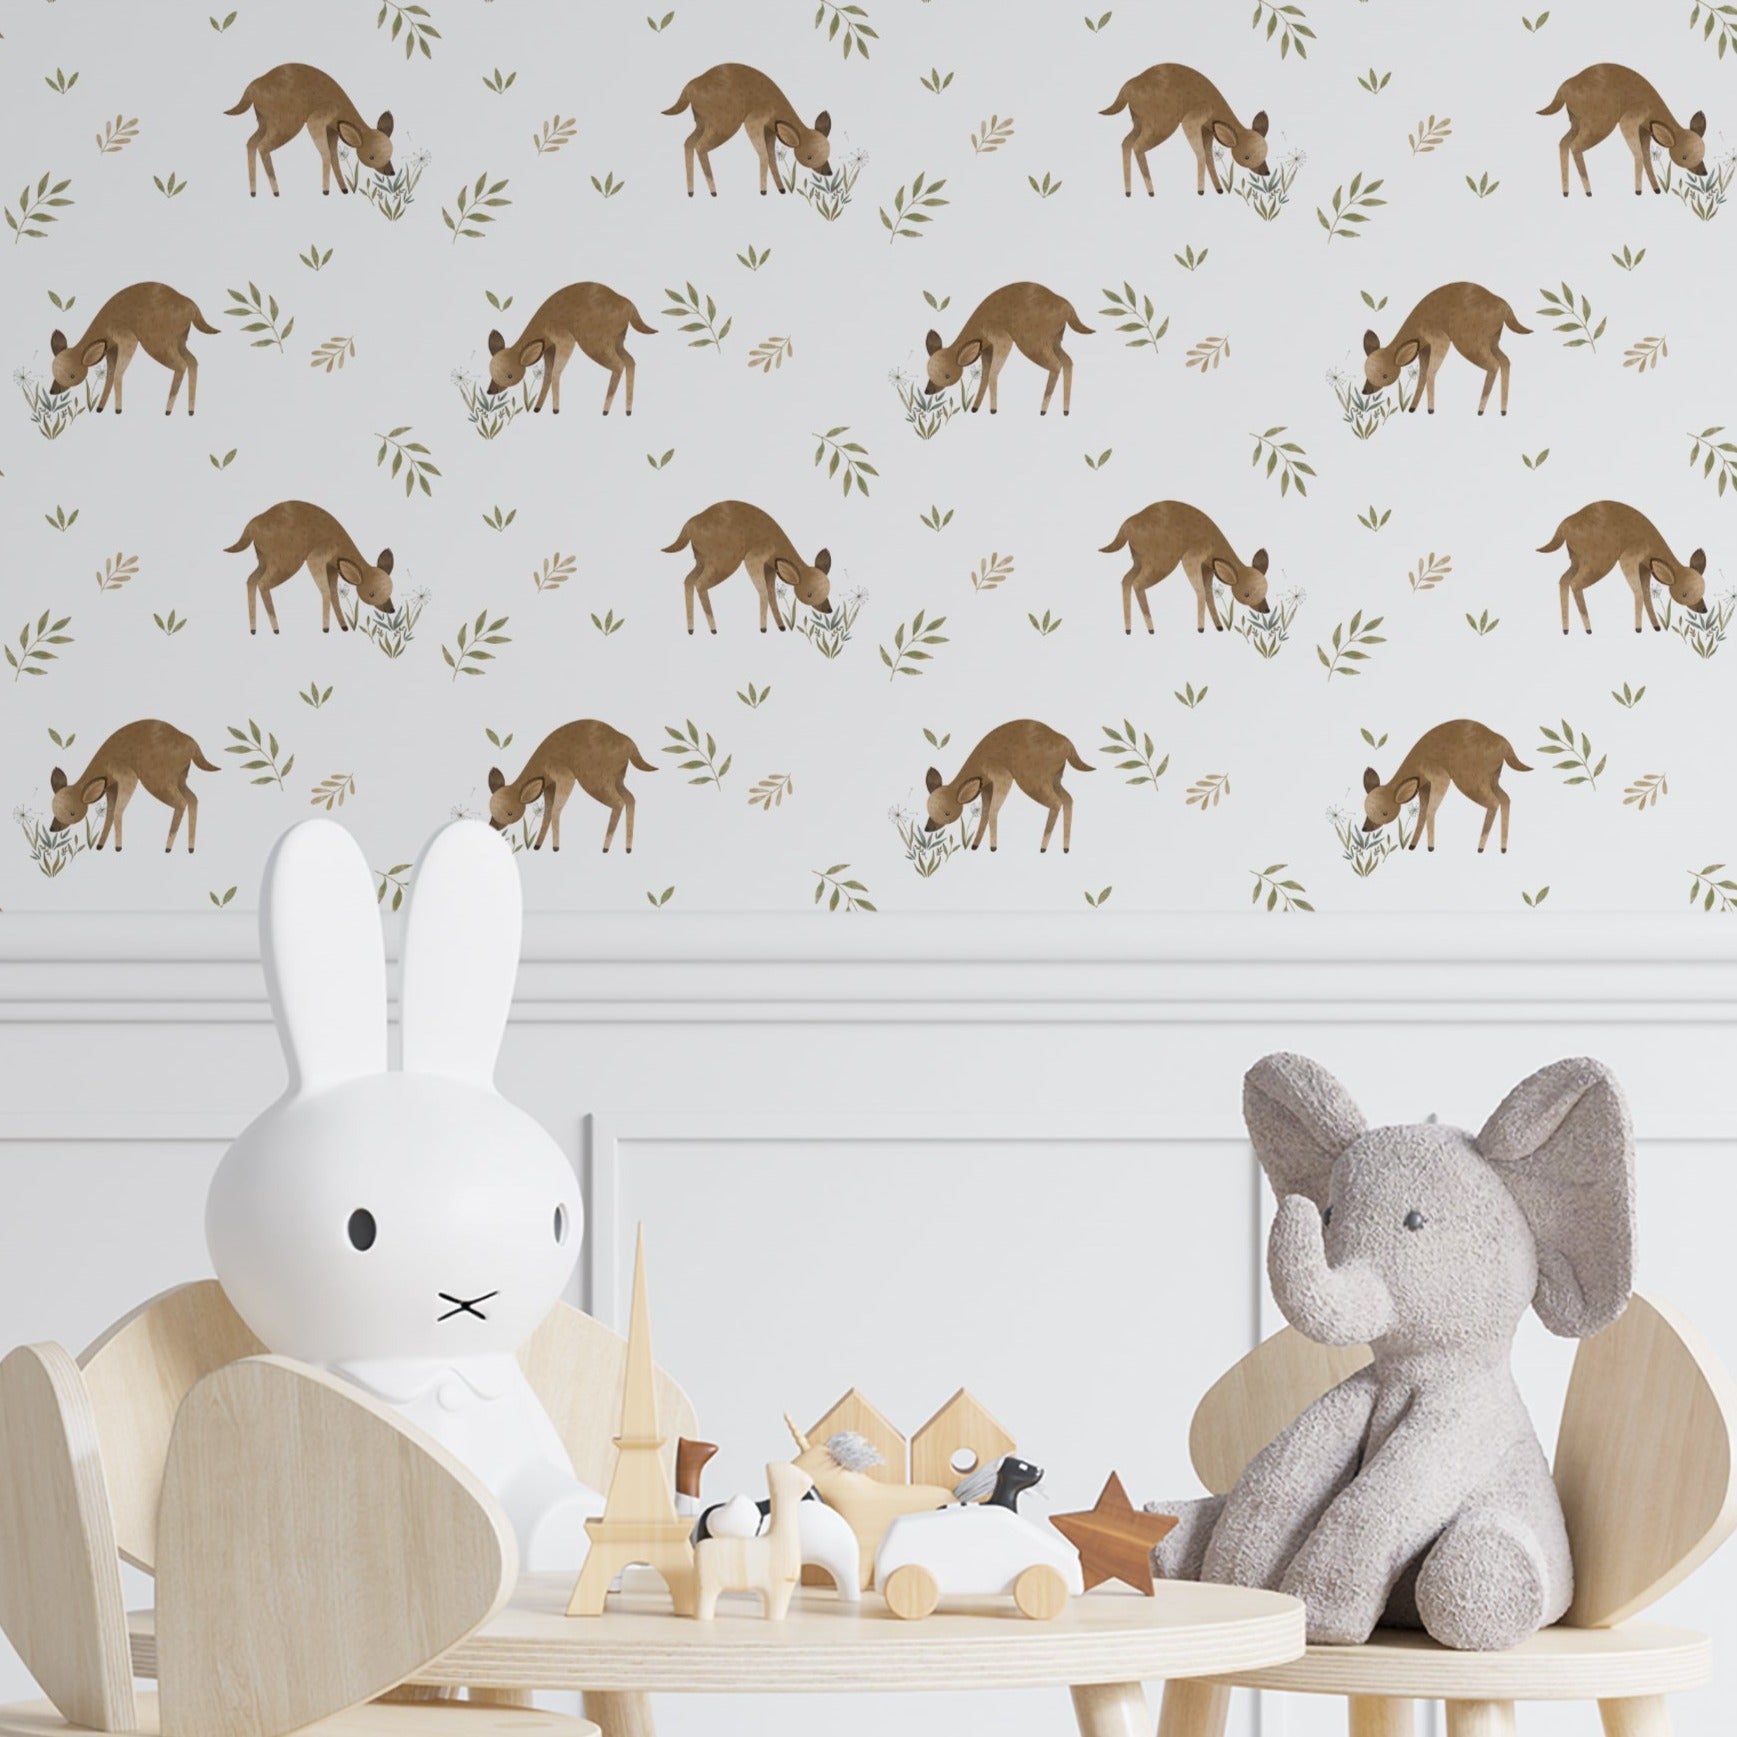 A cozy children's room decorated with Forest Fawn Wallpaper, enhancing the playful yet tranquil atmosphere. The gentle pattern of fawns, flowers, and leaves provides a naturalistic backdrop ideal for nurturing environments